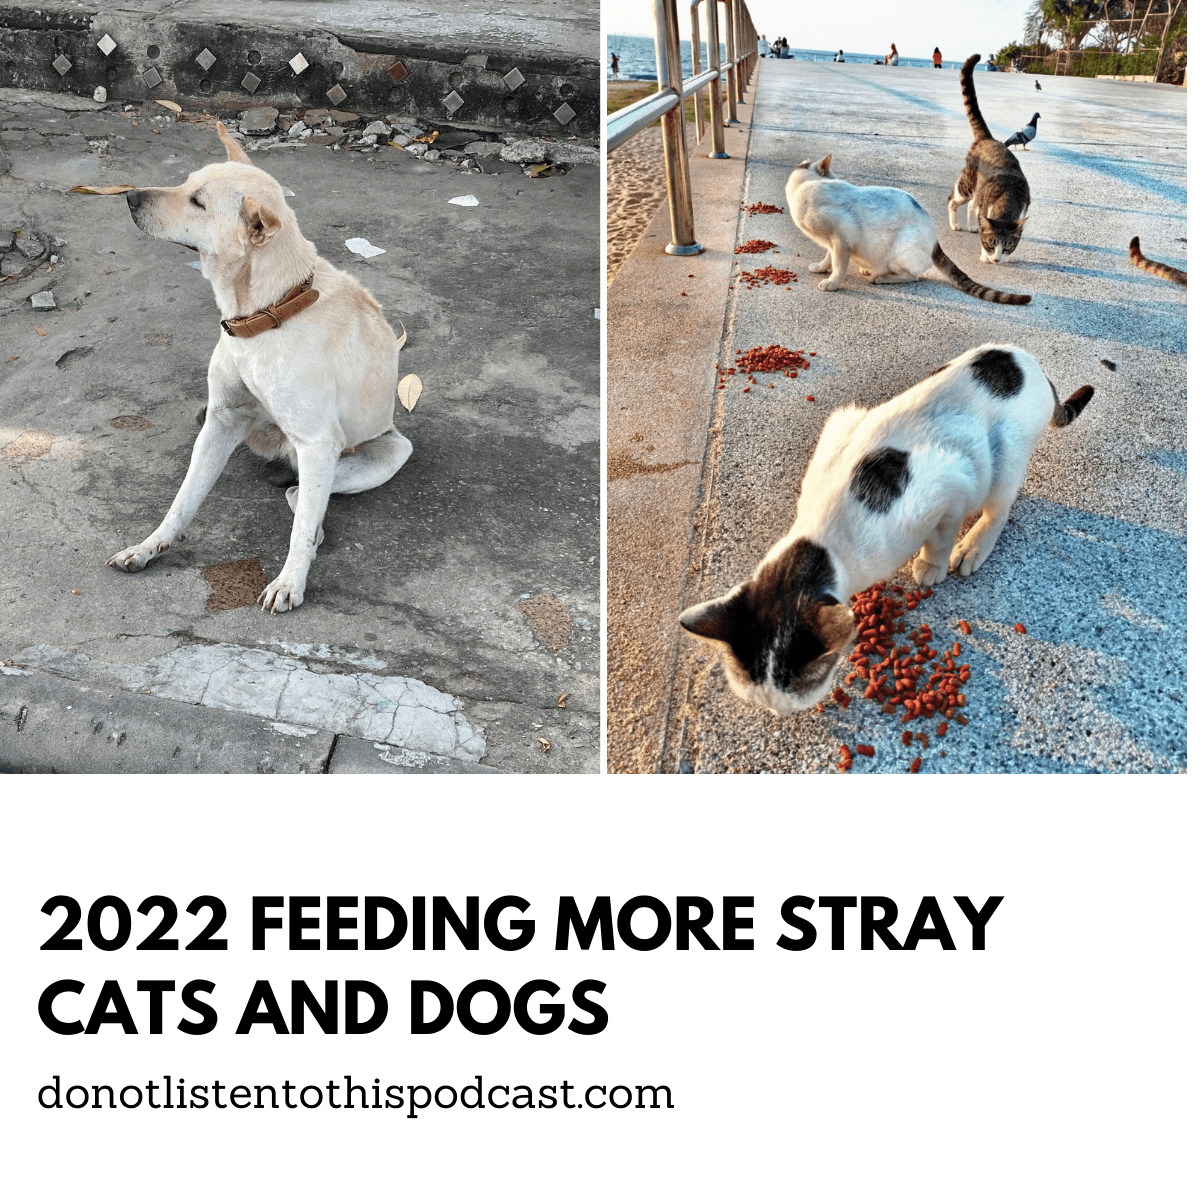 Feeding More Stray Cats & Dogs in 2022 post thumbnail image